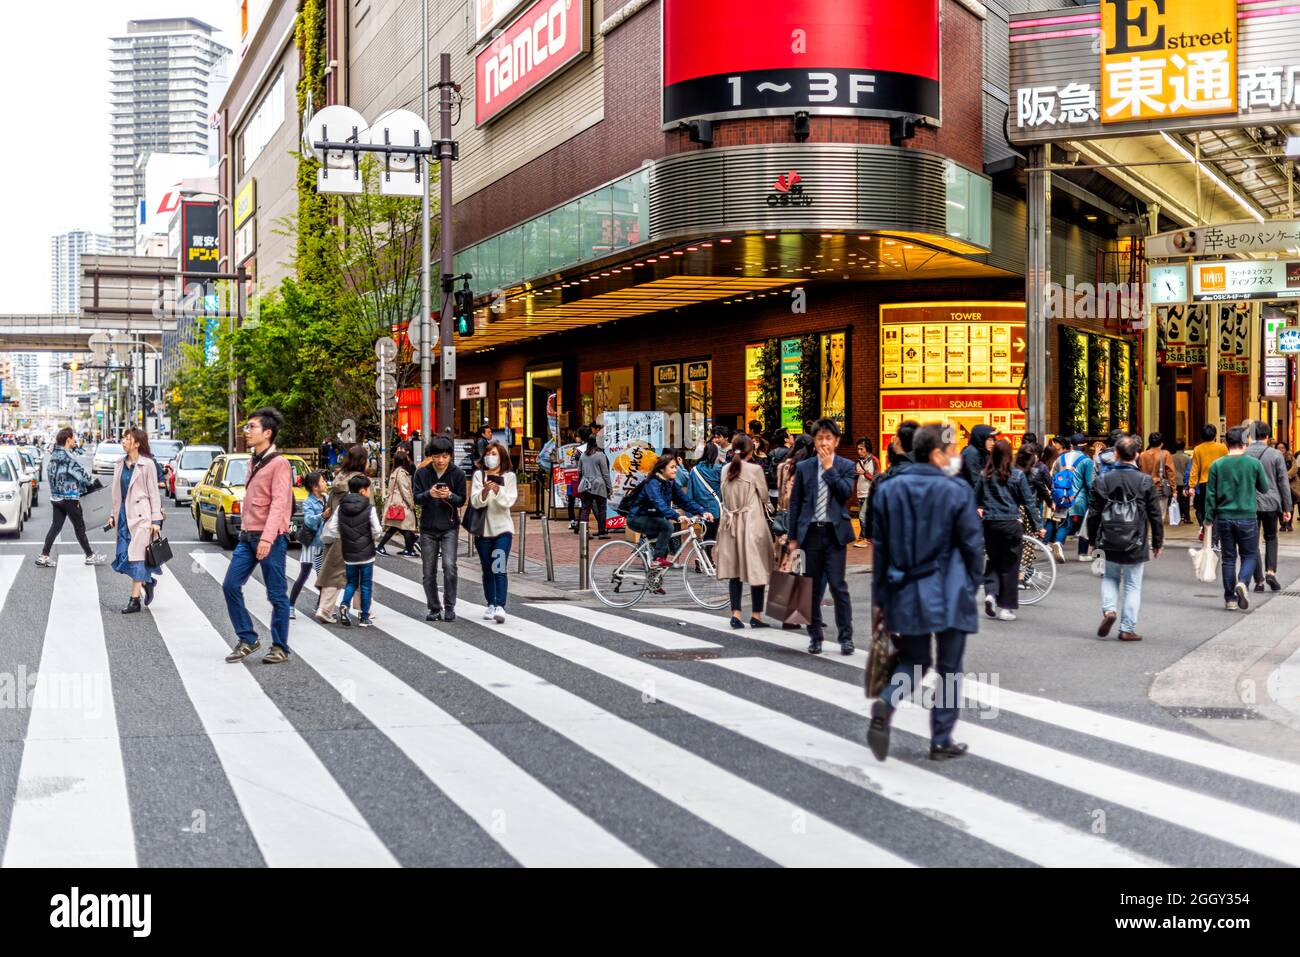 Osaka, Japan - April 13, 2019: Modern buildings road near station with traffic of candid people crossing street to famous arcade and business signs Stock Photo